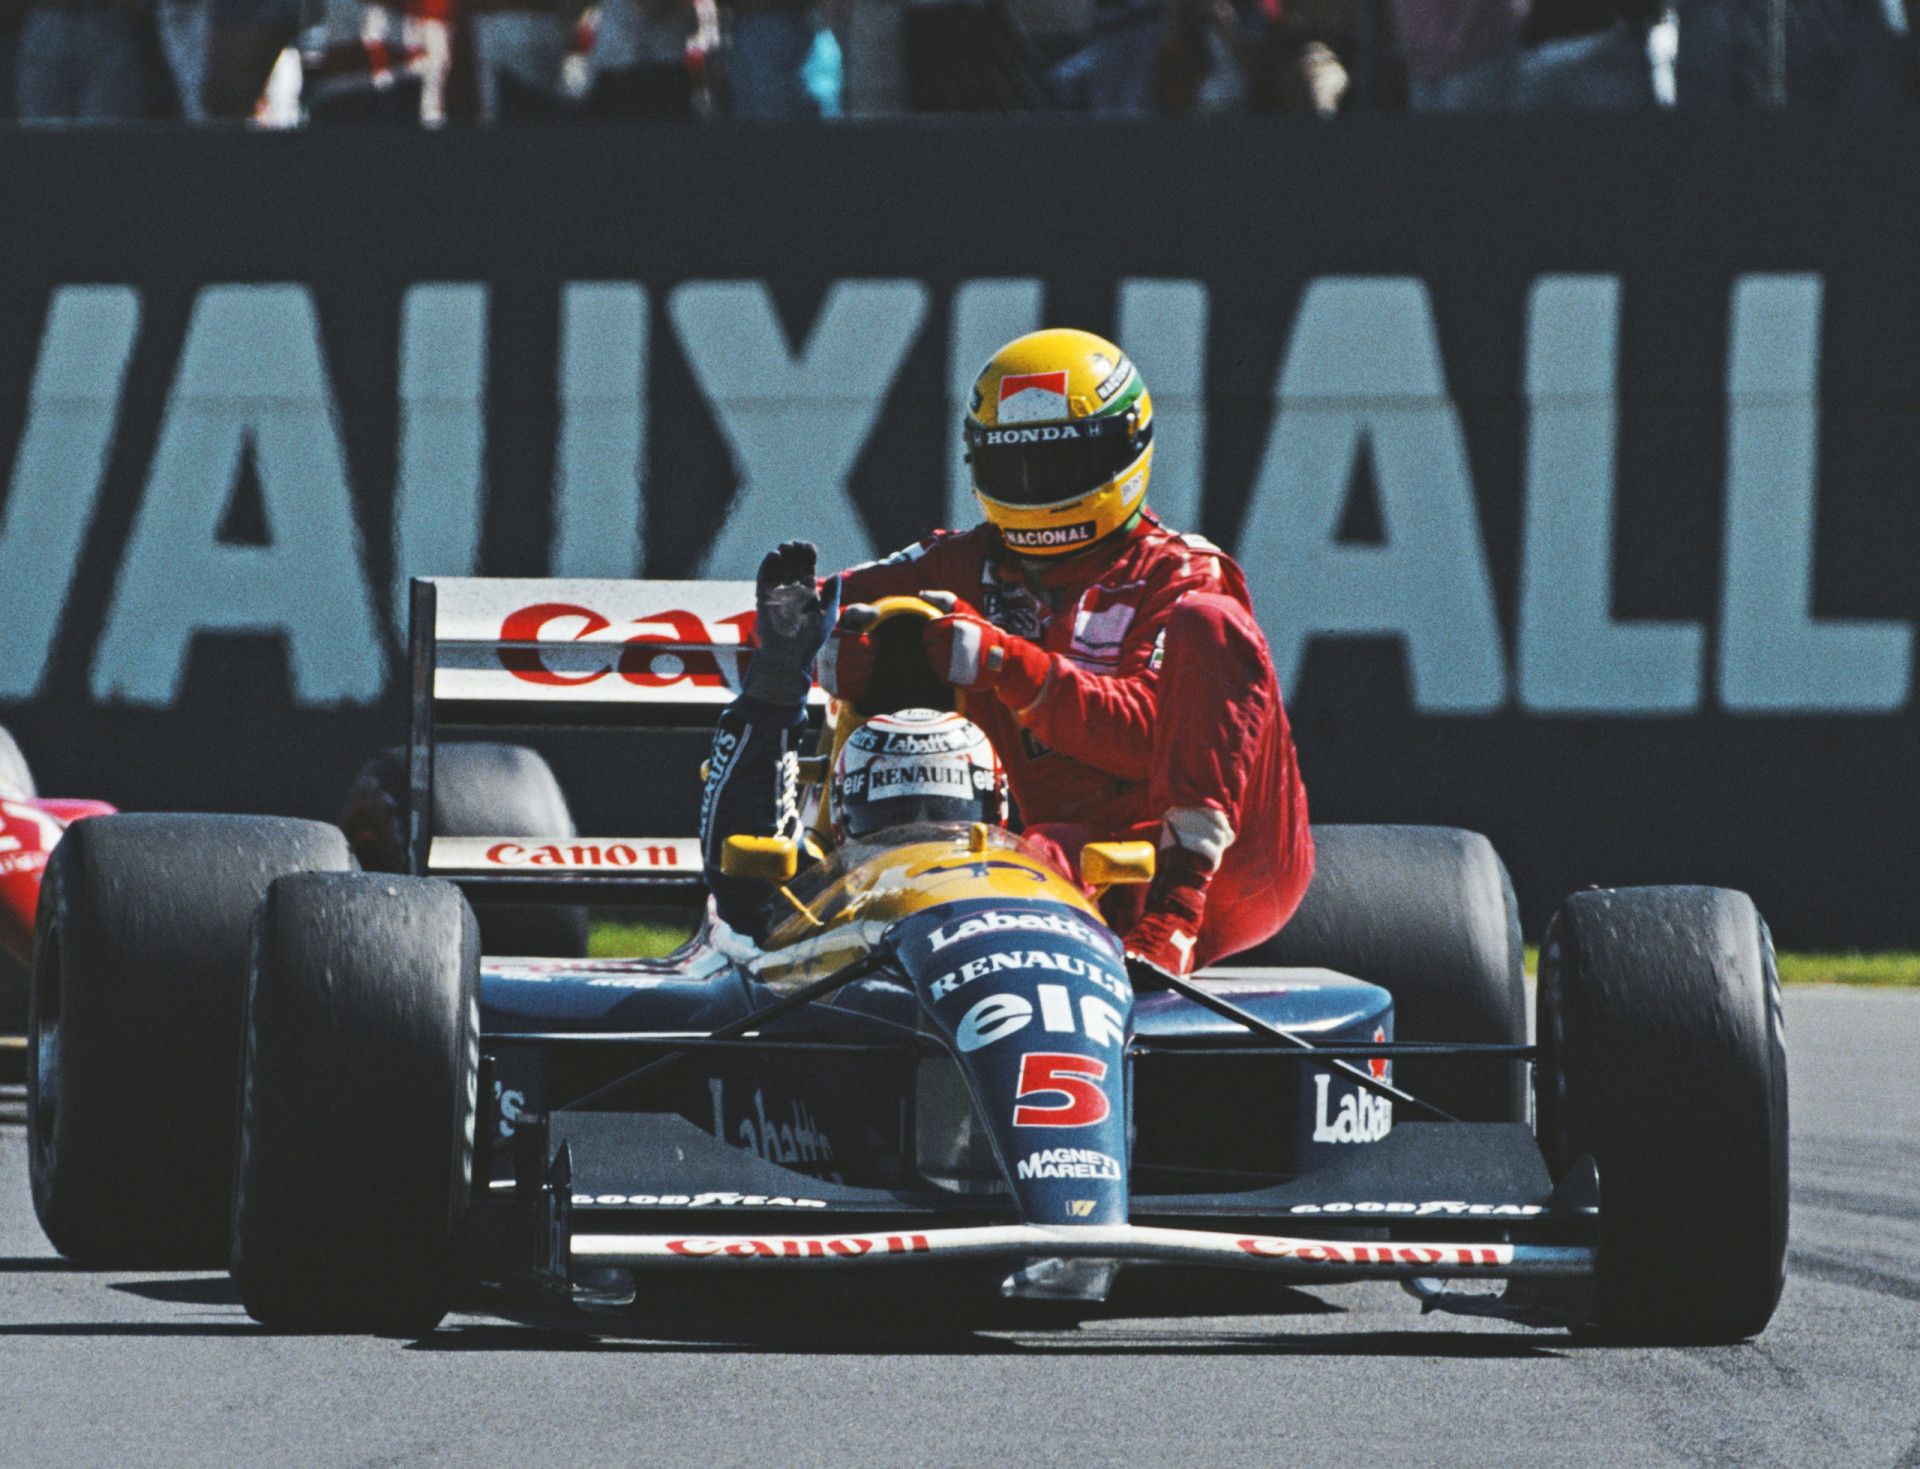 <p>The 1992 season saw Nigel Mansell emerge as a serious threat to Ayrton Senna, compounded by the fact that Mansell was driving the Williams' all-conquering FW14B car, a machine McLaren simply couldn't match in terms of power and performance. Senna is pictured being given a lift back to the pits by Mansell after he had run out of fuel during the British Grand Prix on July 14, 1991.</p><p>You may also like:<a href="https://www.starsinsider.com/n/464771?utm_source=msn.com&utm_medium=display&utm_campaign=referral_description&utm_content=703485en-us"> Actors who didn't live to see their final films</a></p>